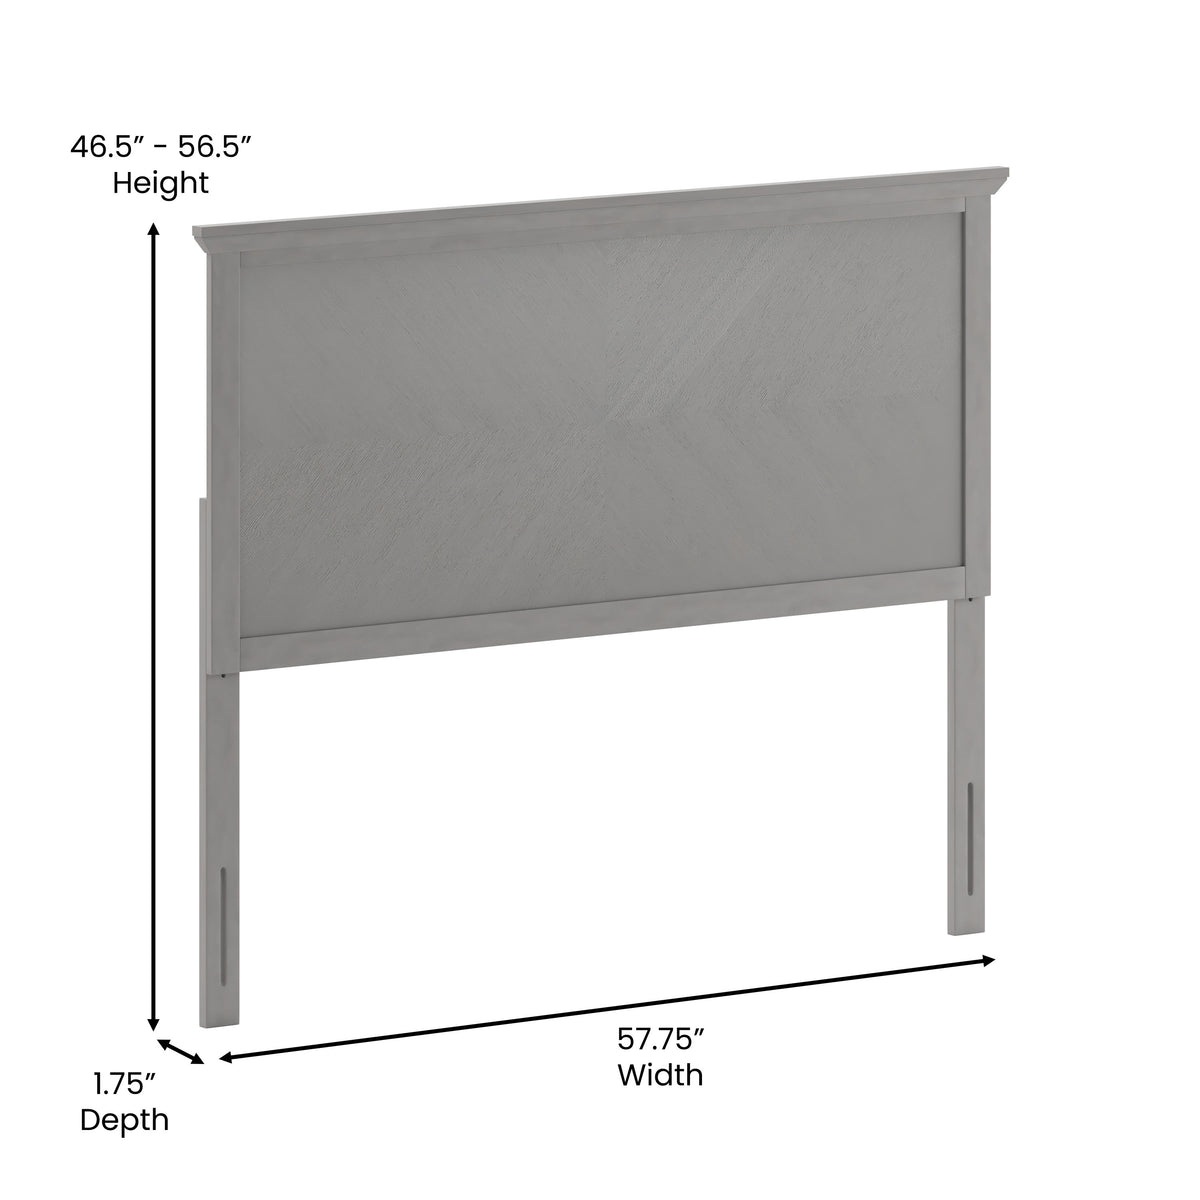 Gray Wash,Full |#| Contemporary Full Size Herring Bone Wooden Headboard Only in Gray Wash